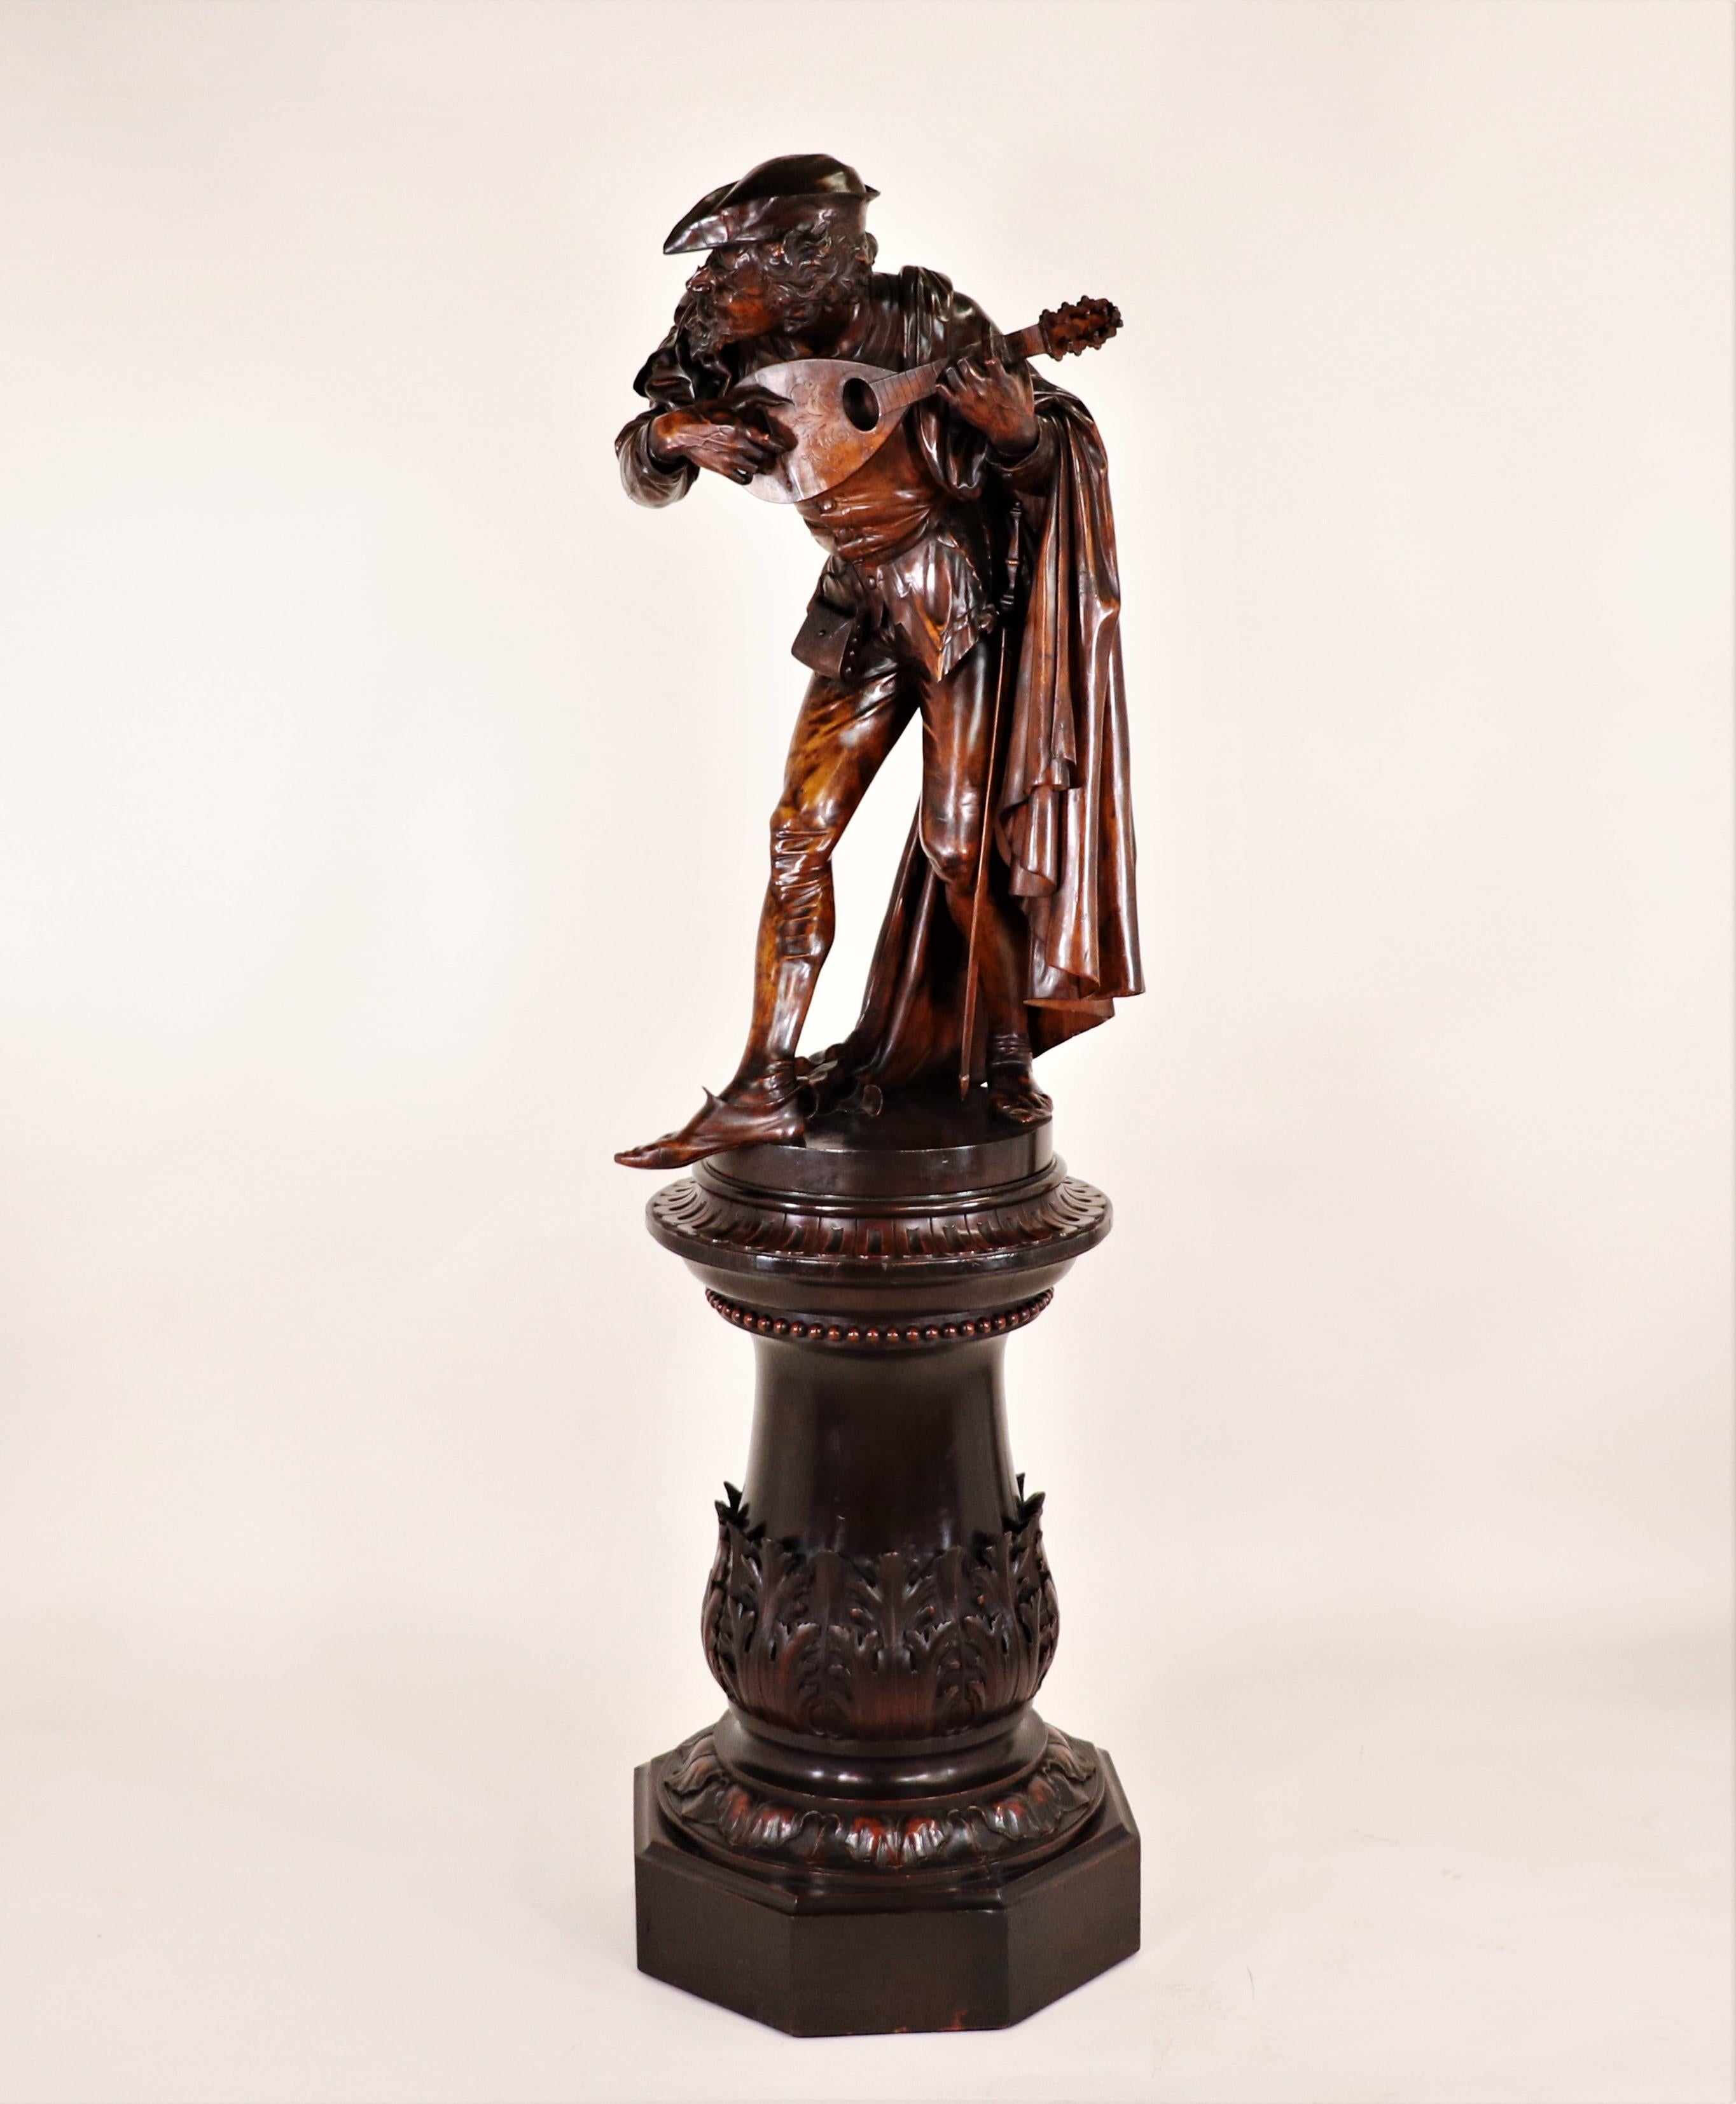 This outstanding 19th-century Italian carved lime wood sculpture of a bearded troubadour playing the mandolin was carved by the famous Italian woodcarver, Valentino Panciera Besarel (1829-1902). Valentino Panciera Besarel. was born in the province